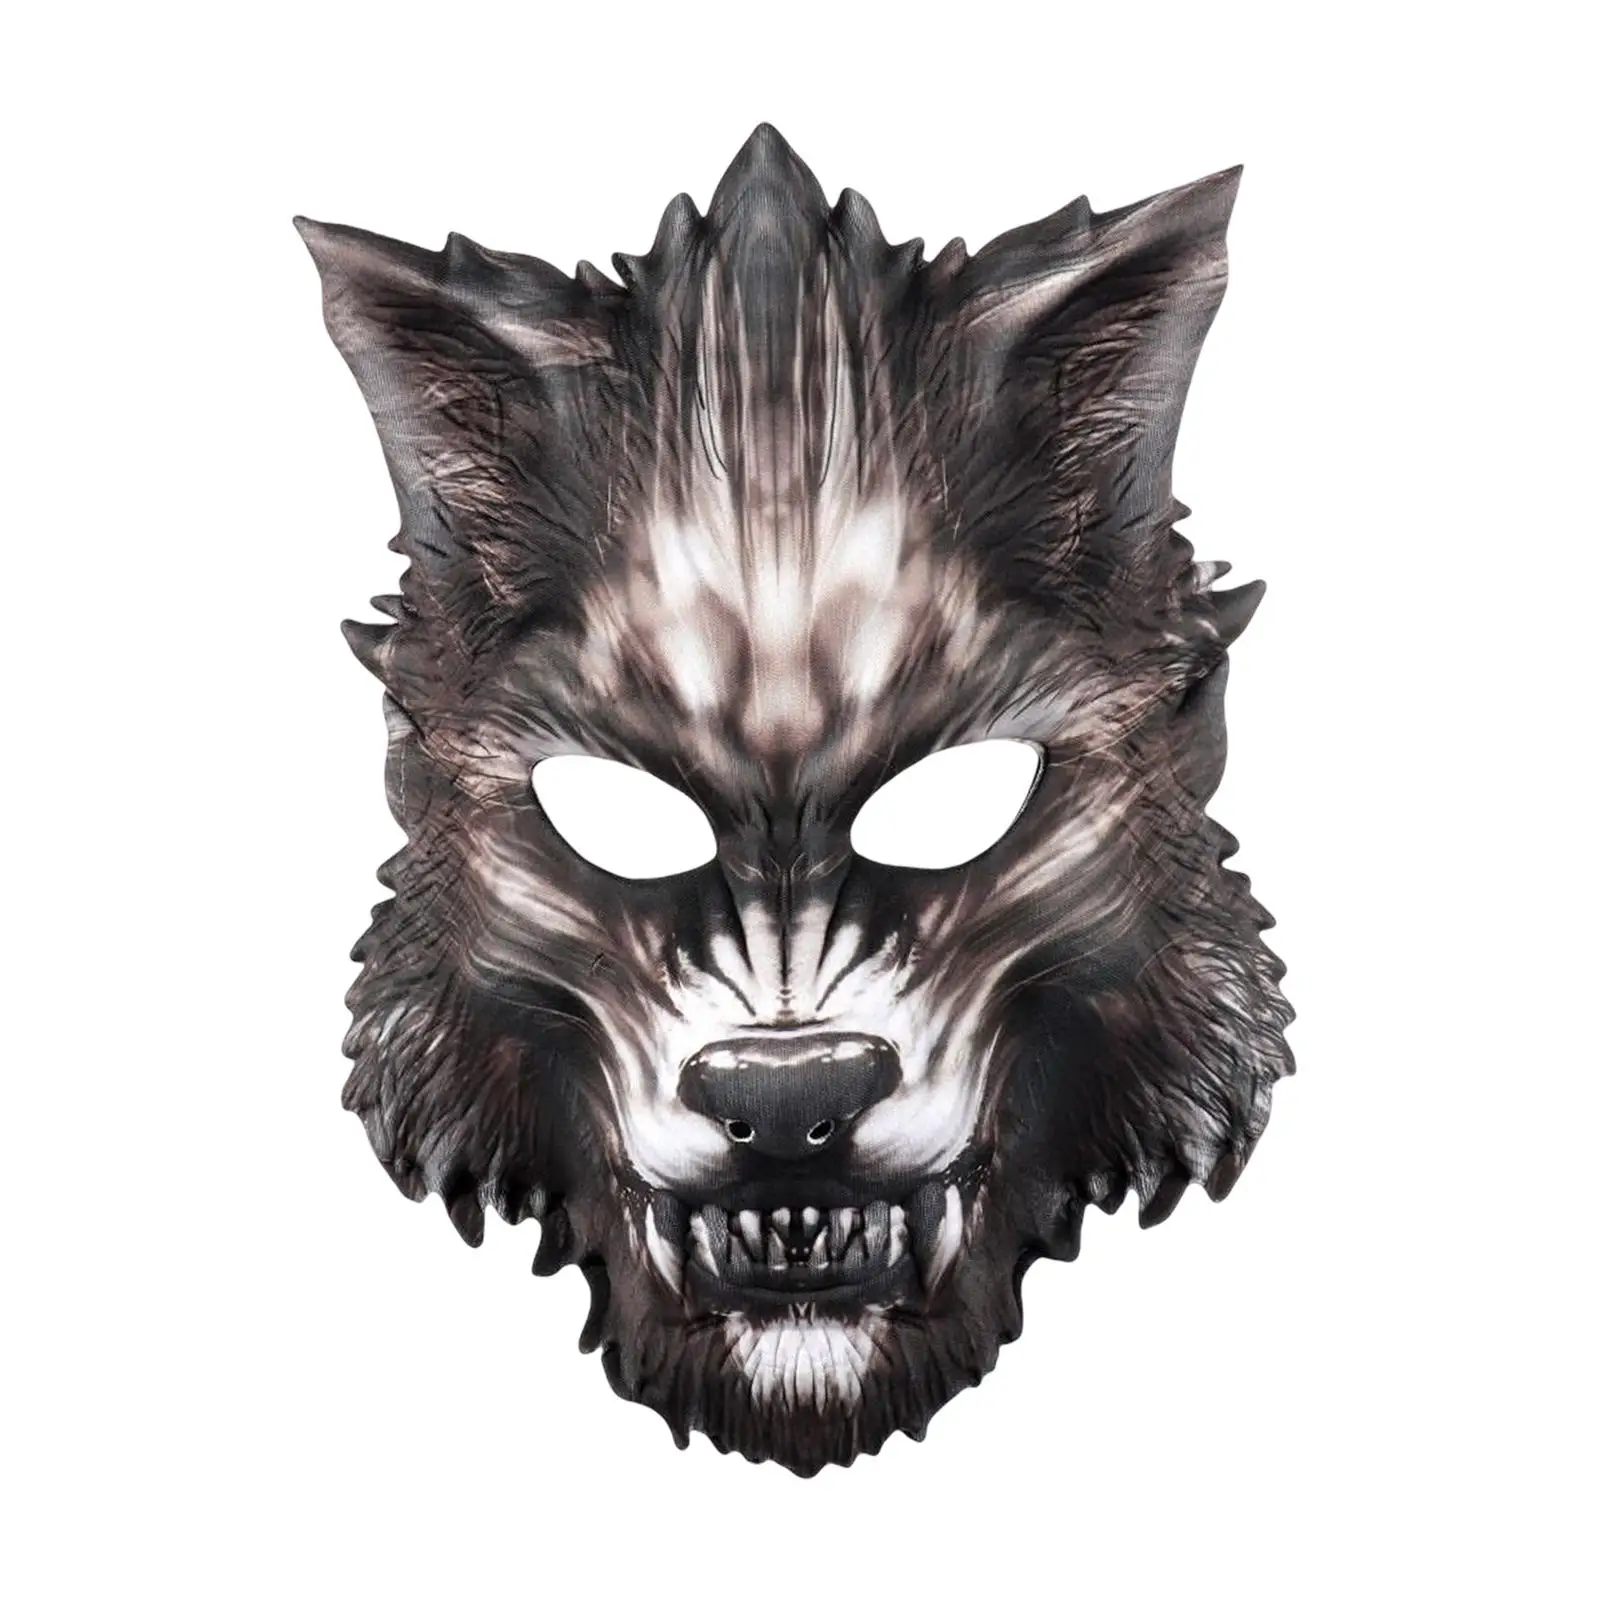 Halloween Wolf Mask Scary Half Face Werewolf for Masquerade Night Show Movie Theme